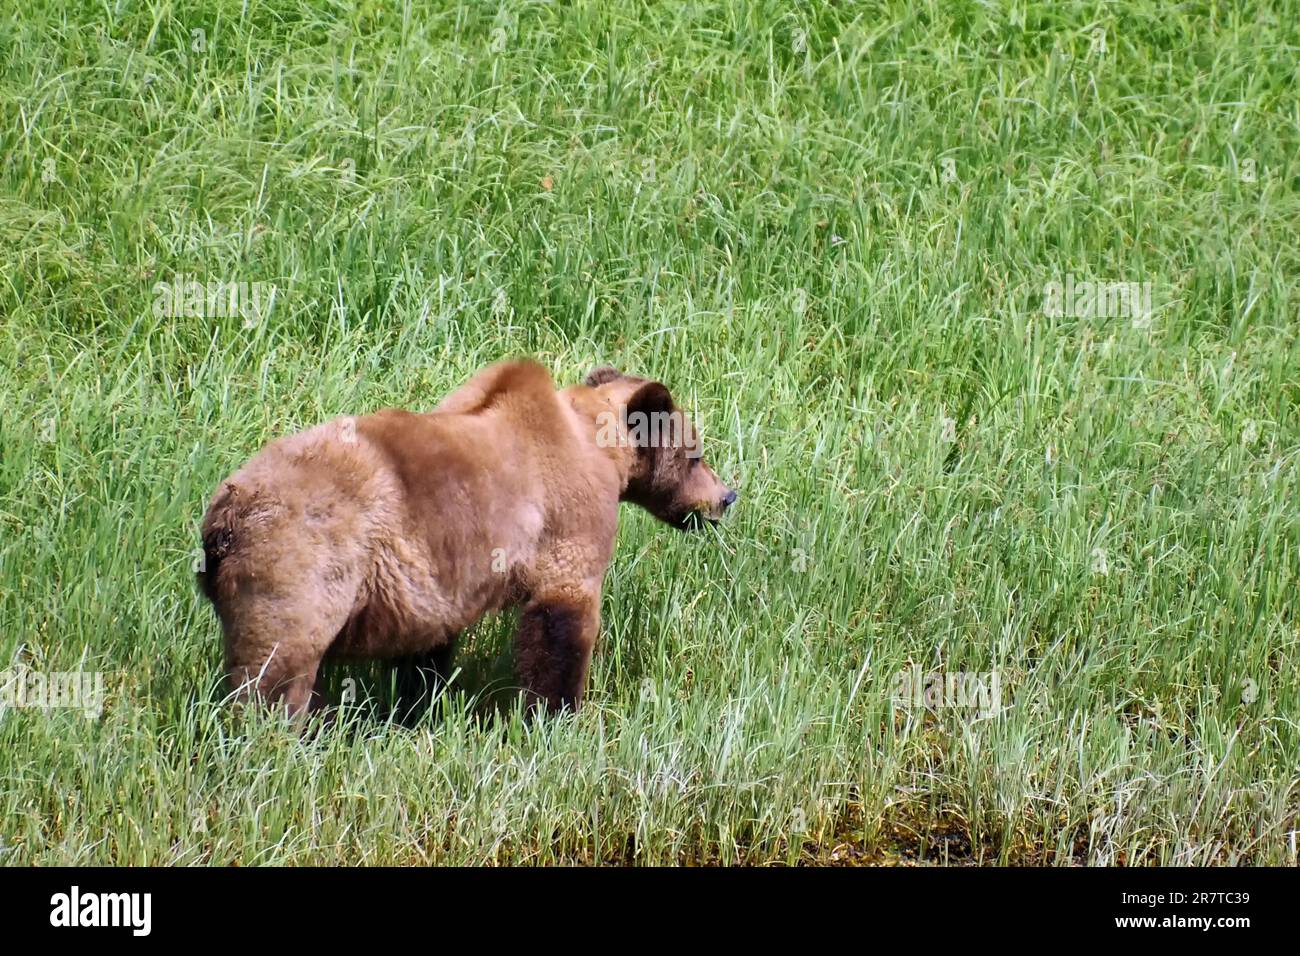 Grizzly in the meadow, eating protein grass, National Park, Khutzeymateen Grizzly Bear Sanctuary, Prince Rupert, British Columbia, Canada Stock Photo